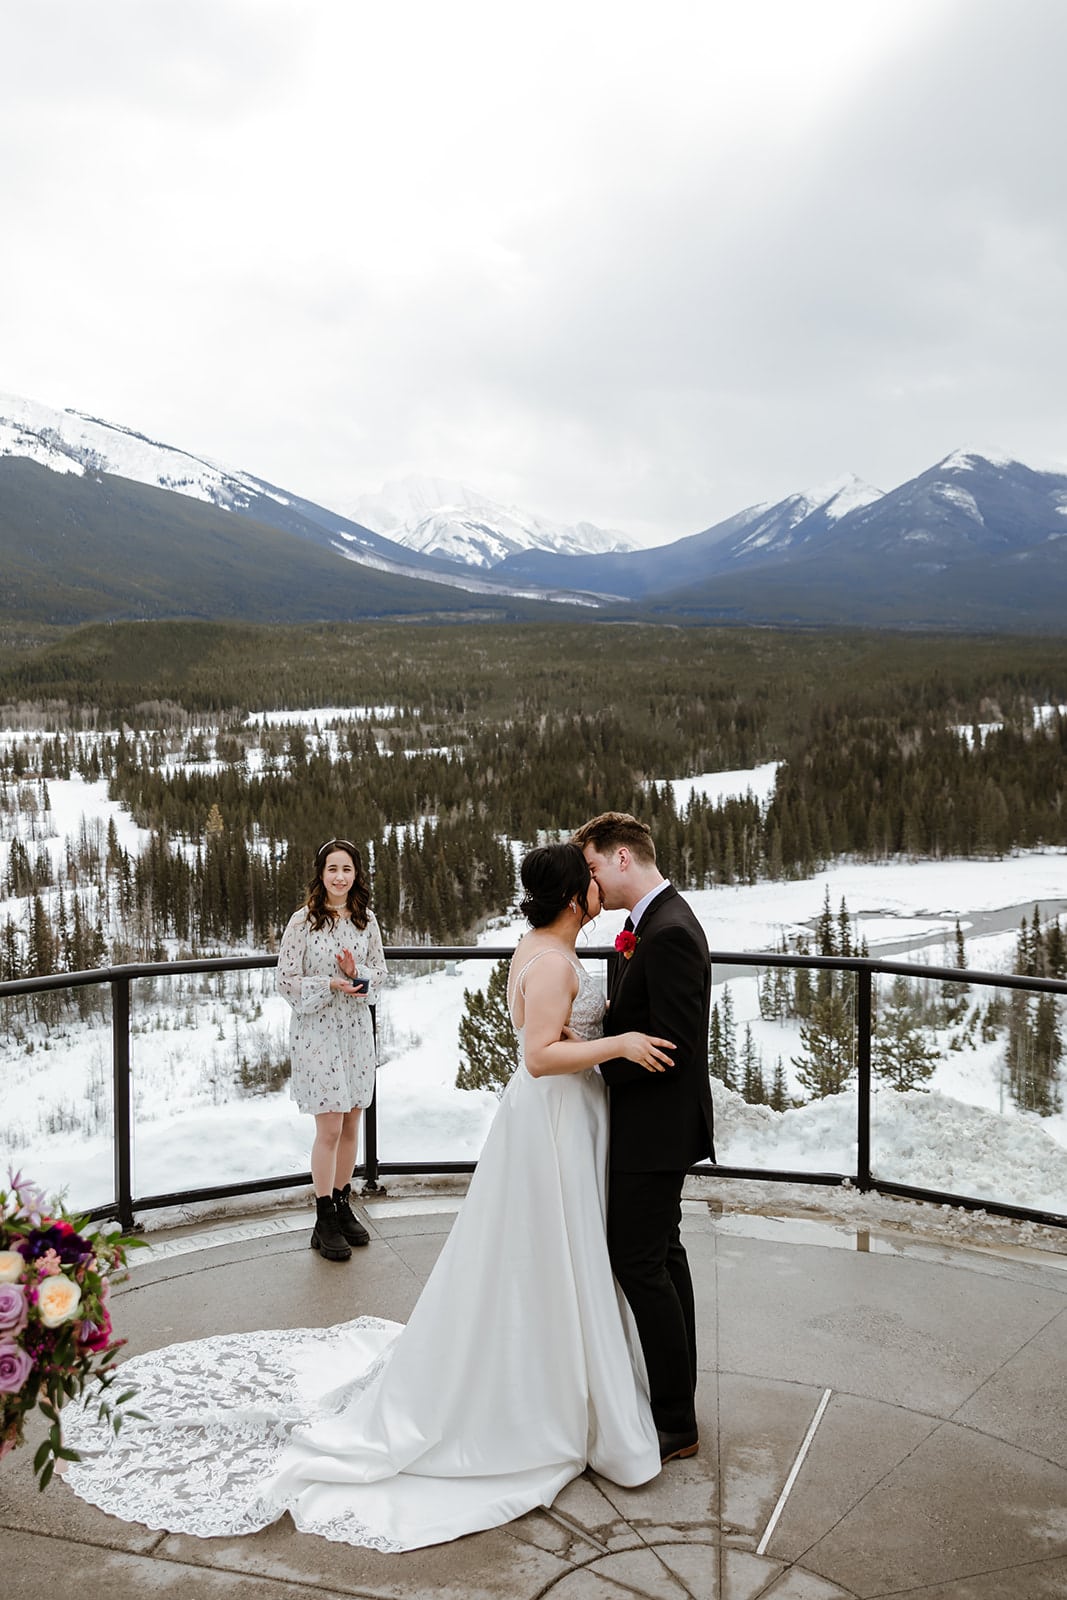 AN OUTDOOR WEDDING CEREMONY IN CANMORE WITH SCENIC VIEWS OF THE MOUNTAINS